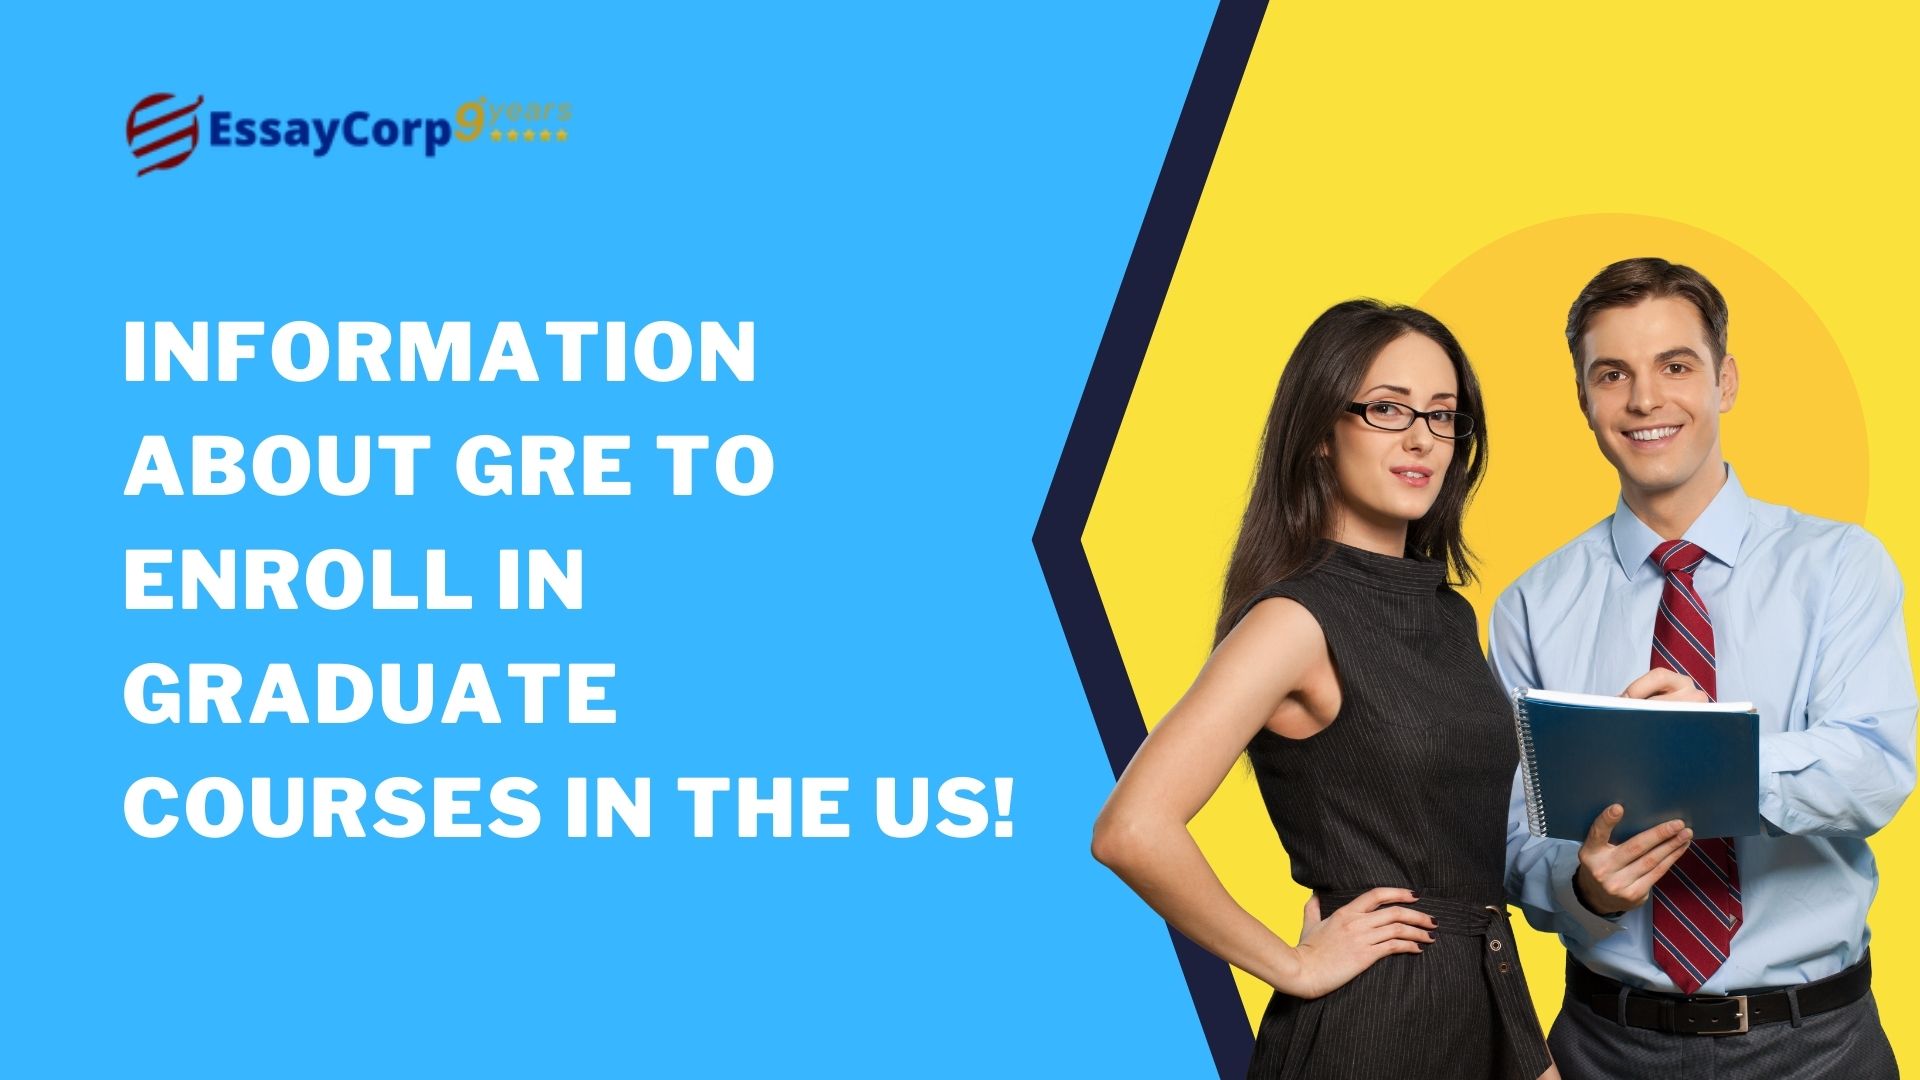 Information About GRE to Enroll in Graduate Courses in the US!